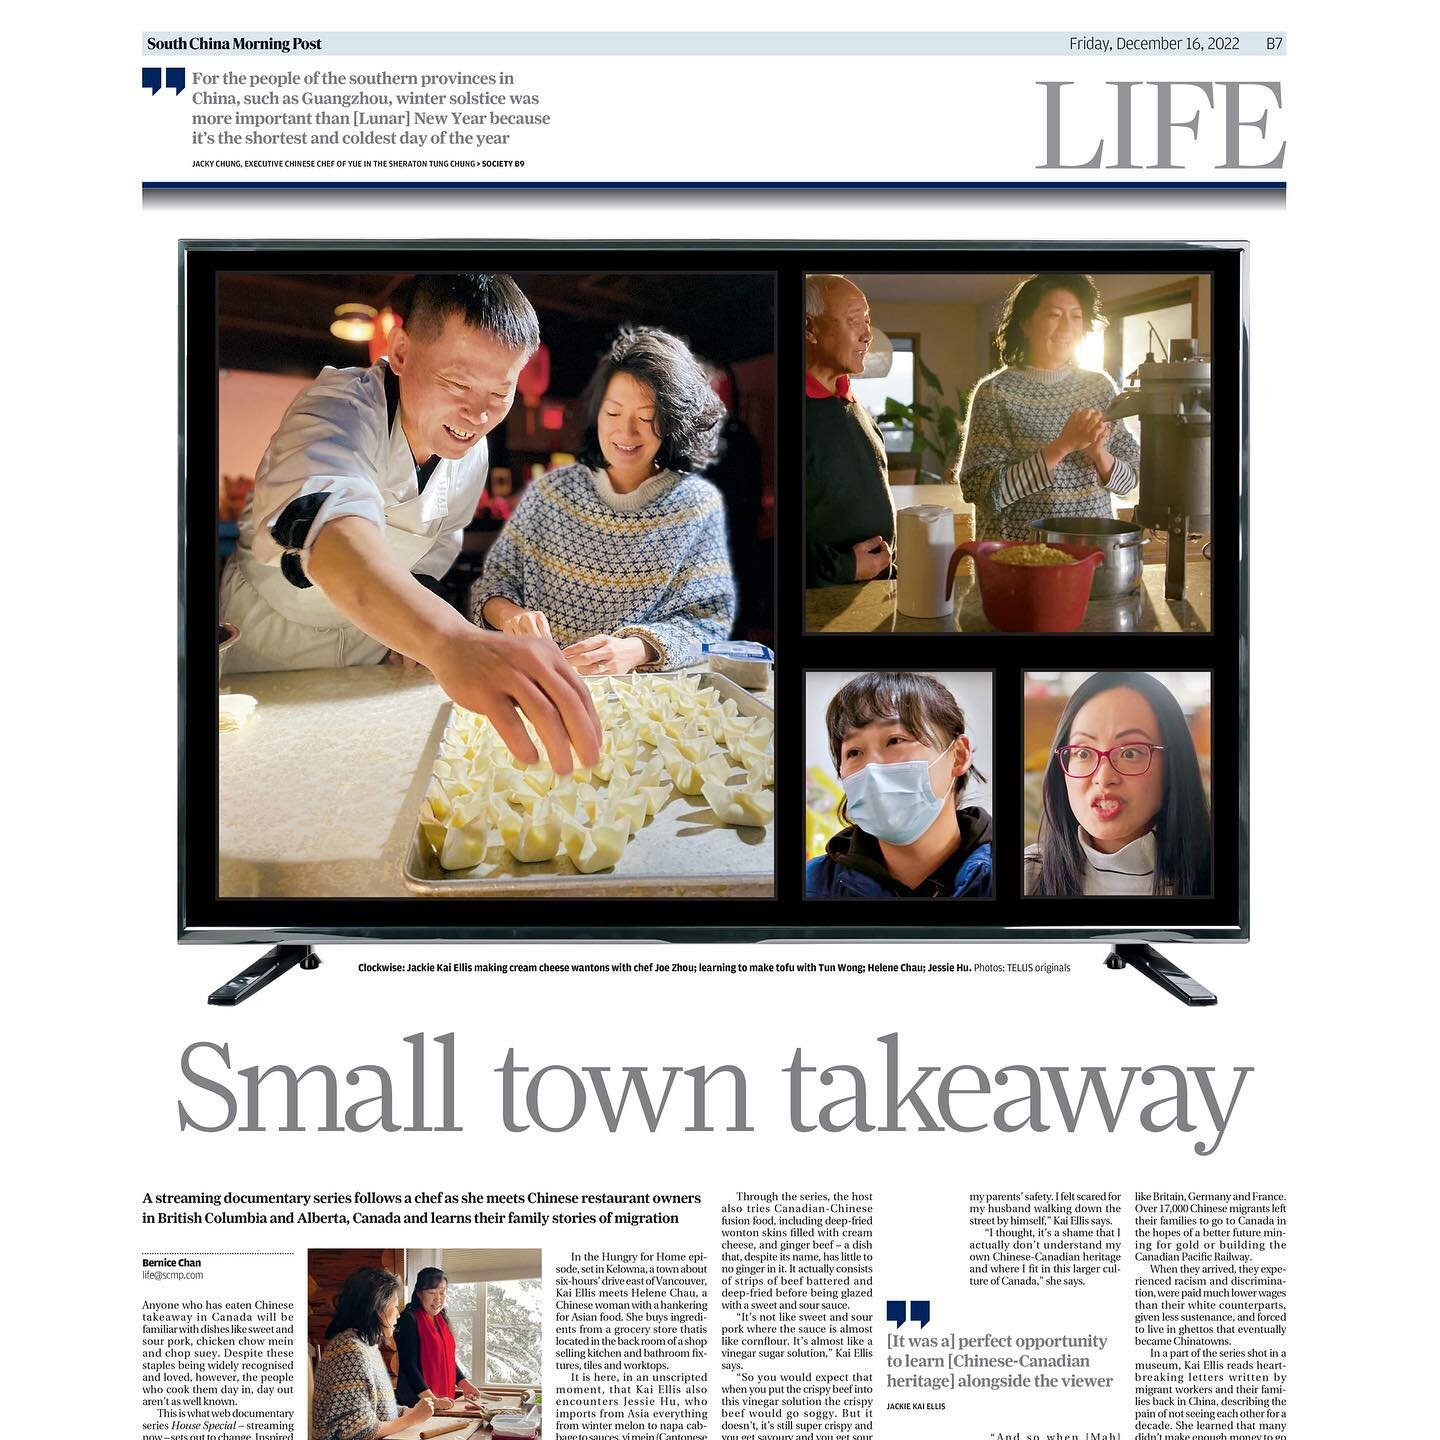 SMALL TOWN TAKEAWAY! Thanks @thebernunithk and South China Morning Post @scmpnews for the amazing write up on our series @housespecialseries 🗞📰!!

HOUSE SPECIAL - A brand new 5 part docu series by award-winning filmmakers Ryan Mah and Danny Berish 